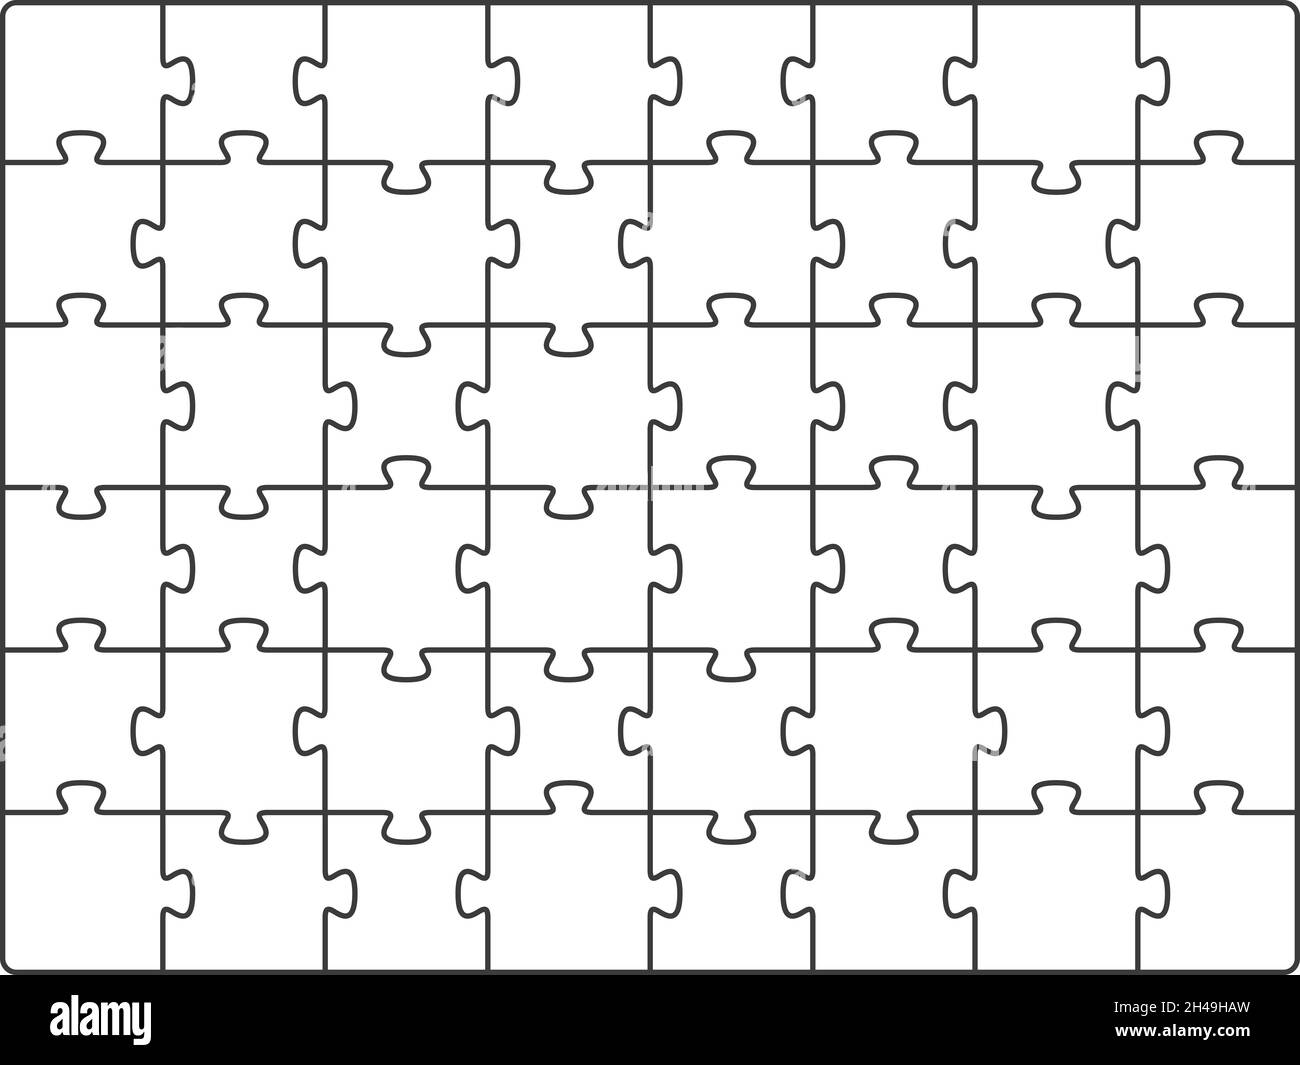 Puzzle pieces square. Jigsaw pattern template, white game square grid. Mosaic tiles, empty geometric business team metaphor, recent vector background Stock Vector